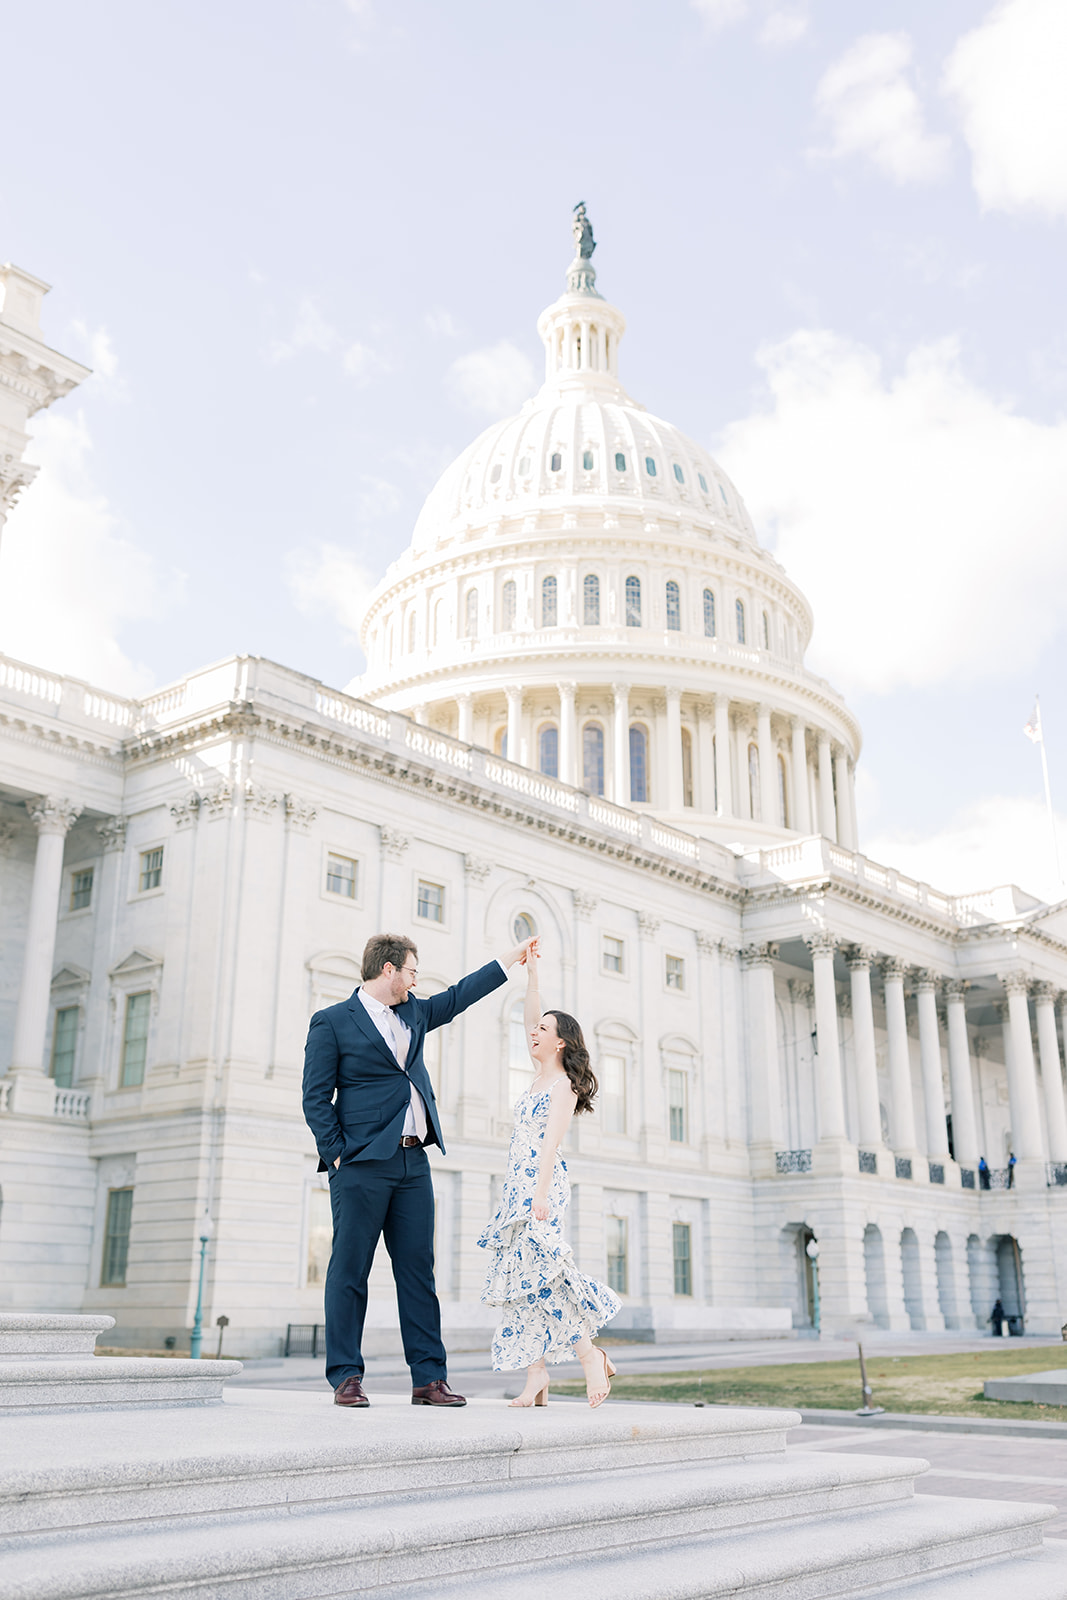 An engaged couple climbs the steps of the U.S. Capitol Building during their winter engagement session